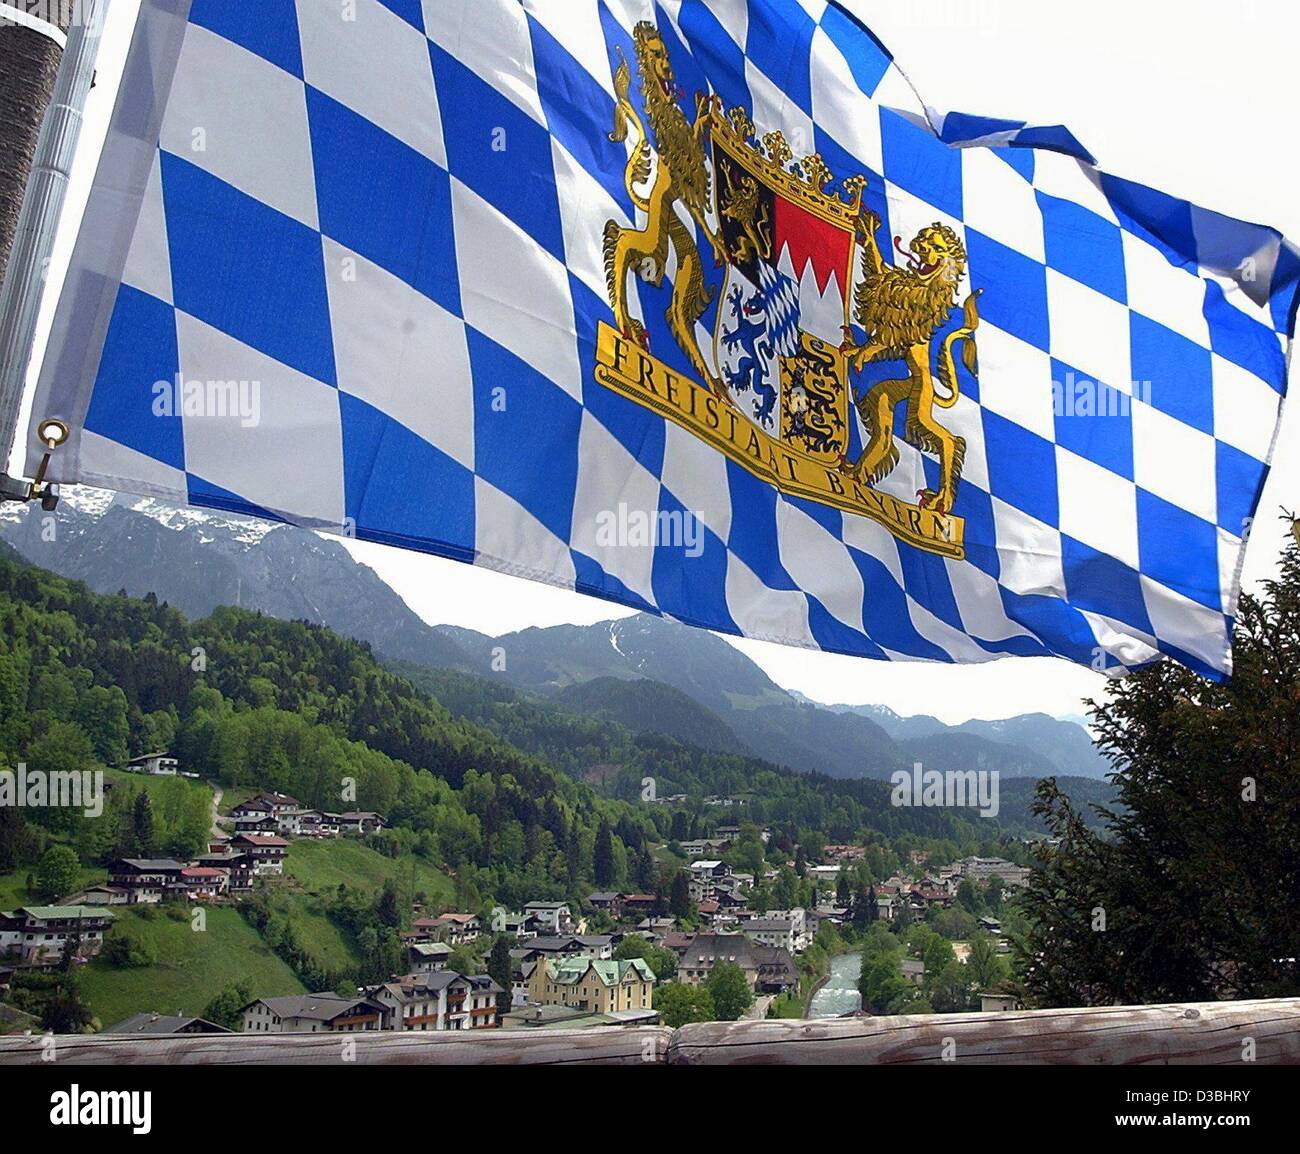 (dpa) - A Bavarian flag waves in the wind above a valley in Berchtesgarden, Germany, 9 May 2003. Stock Photo